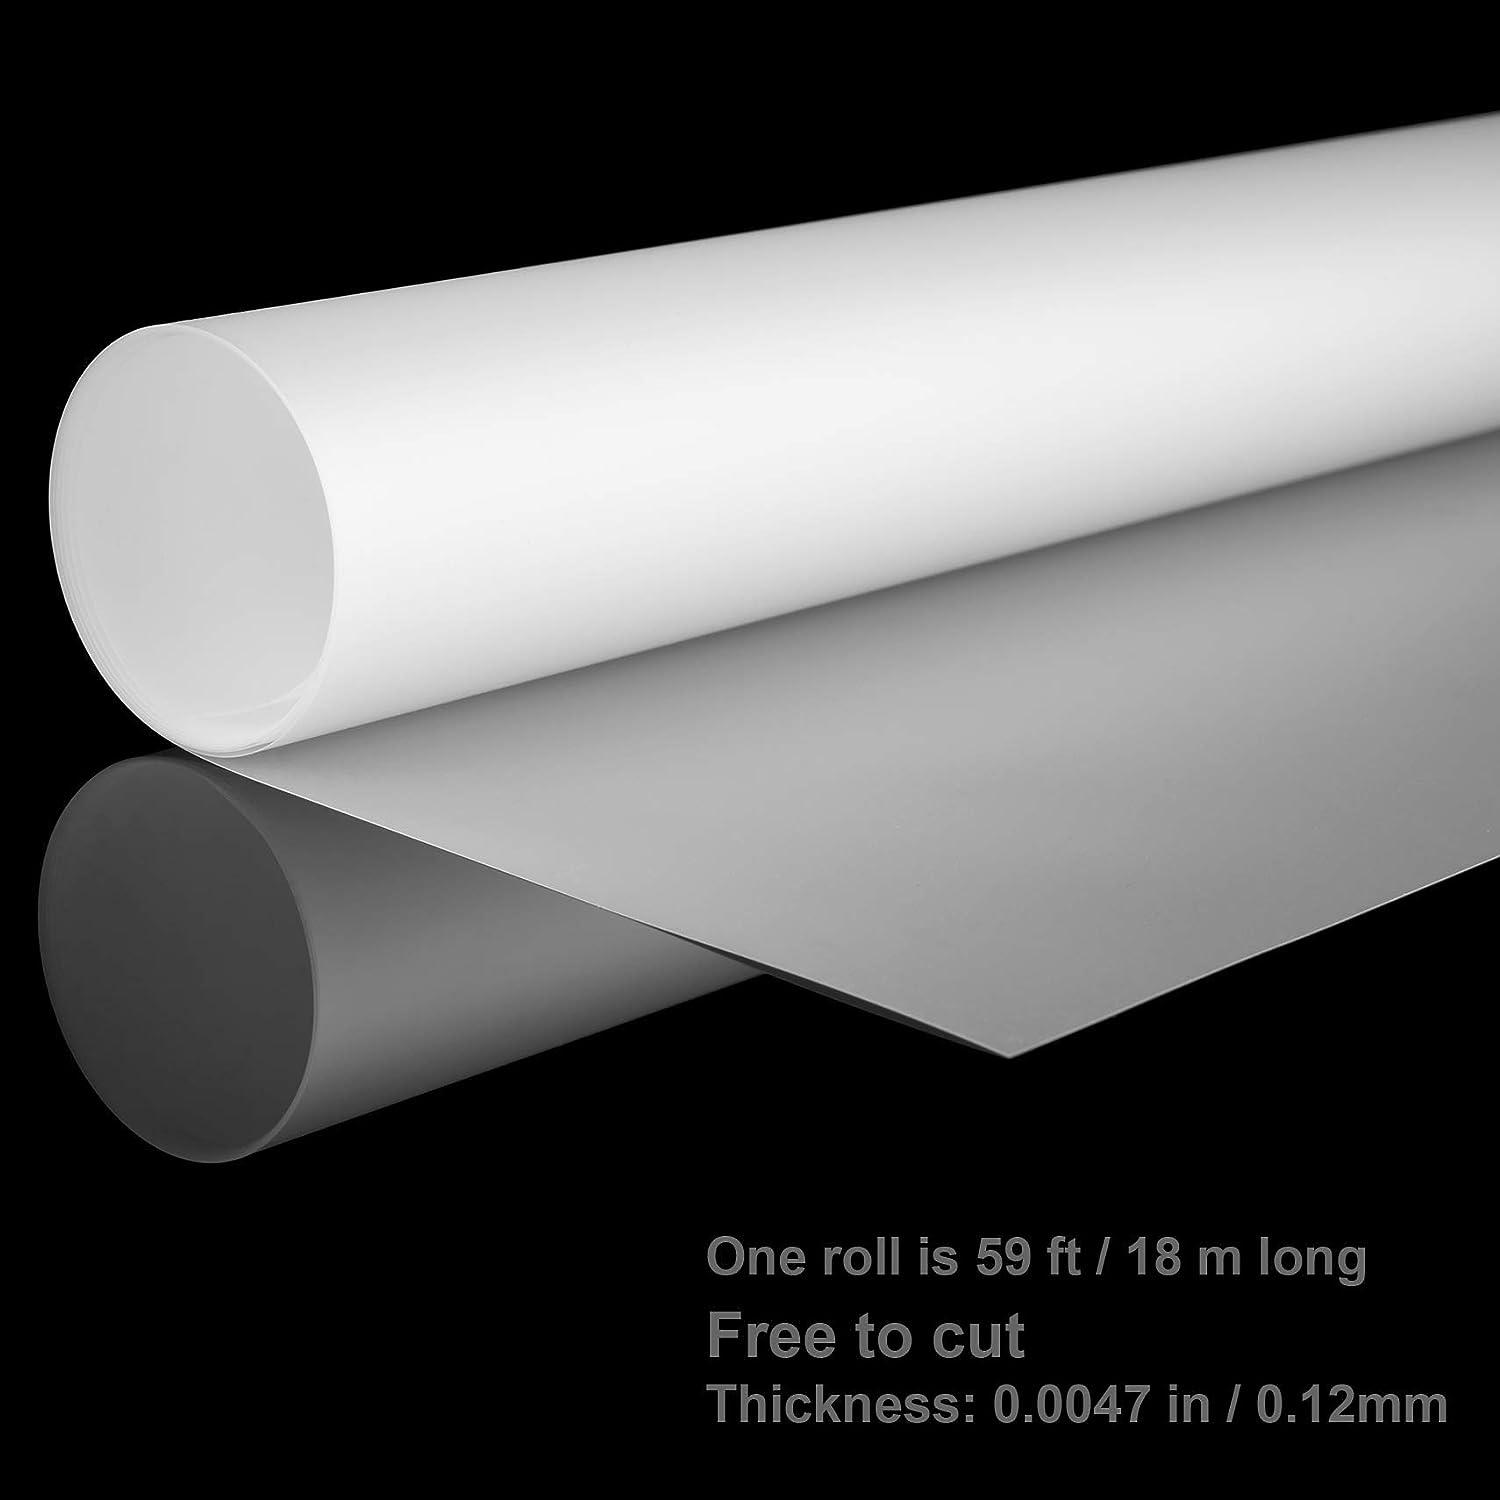 Goshoot Diffusion Lighting Gel Filter Sheet 47x708 inches / 1.2x18 m White  Diffuser Roll Paper Sheet for Photo Studio Product Portrait Photography